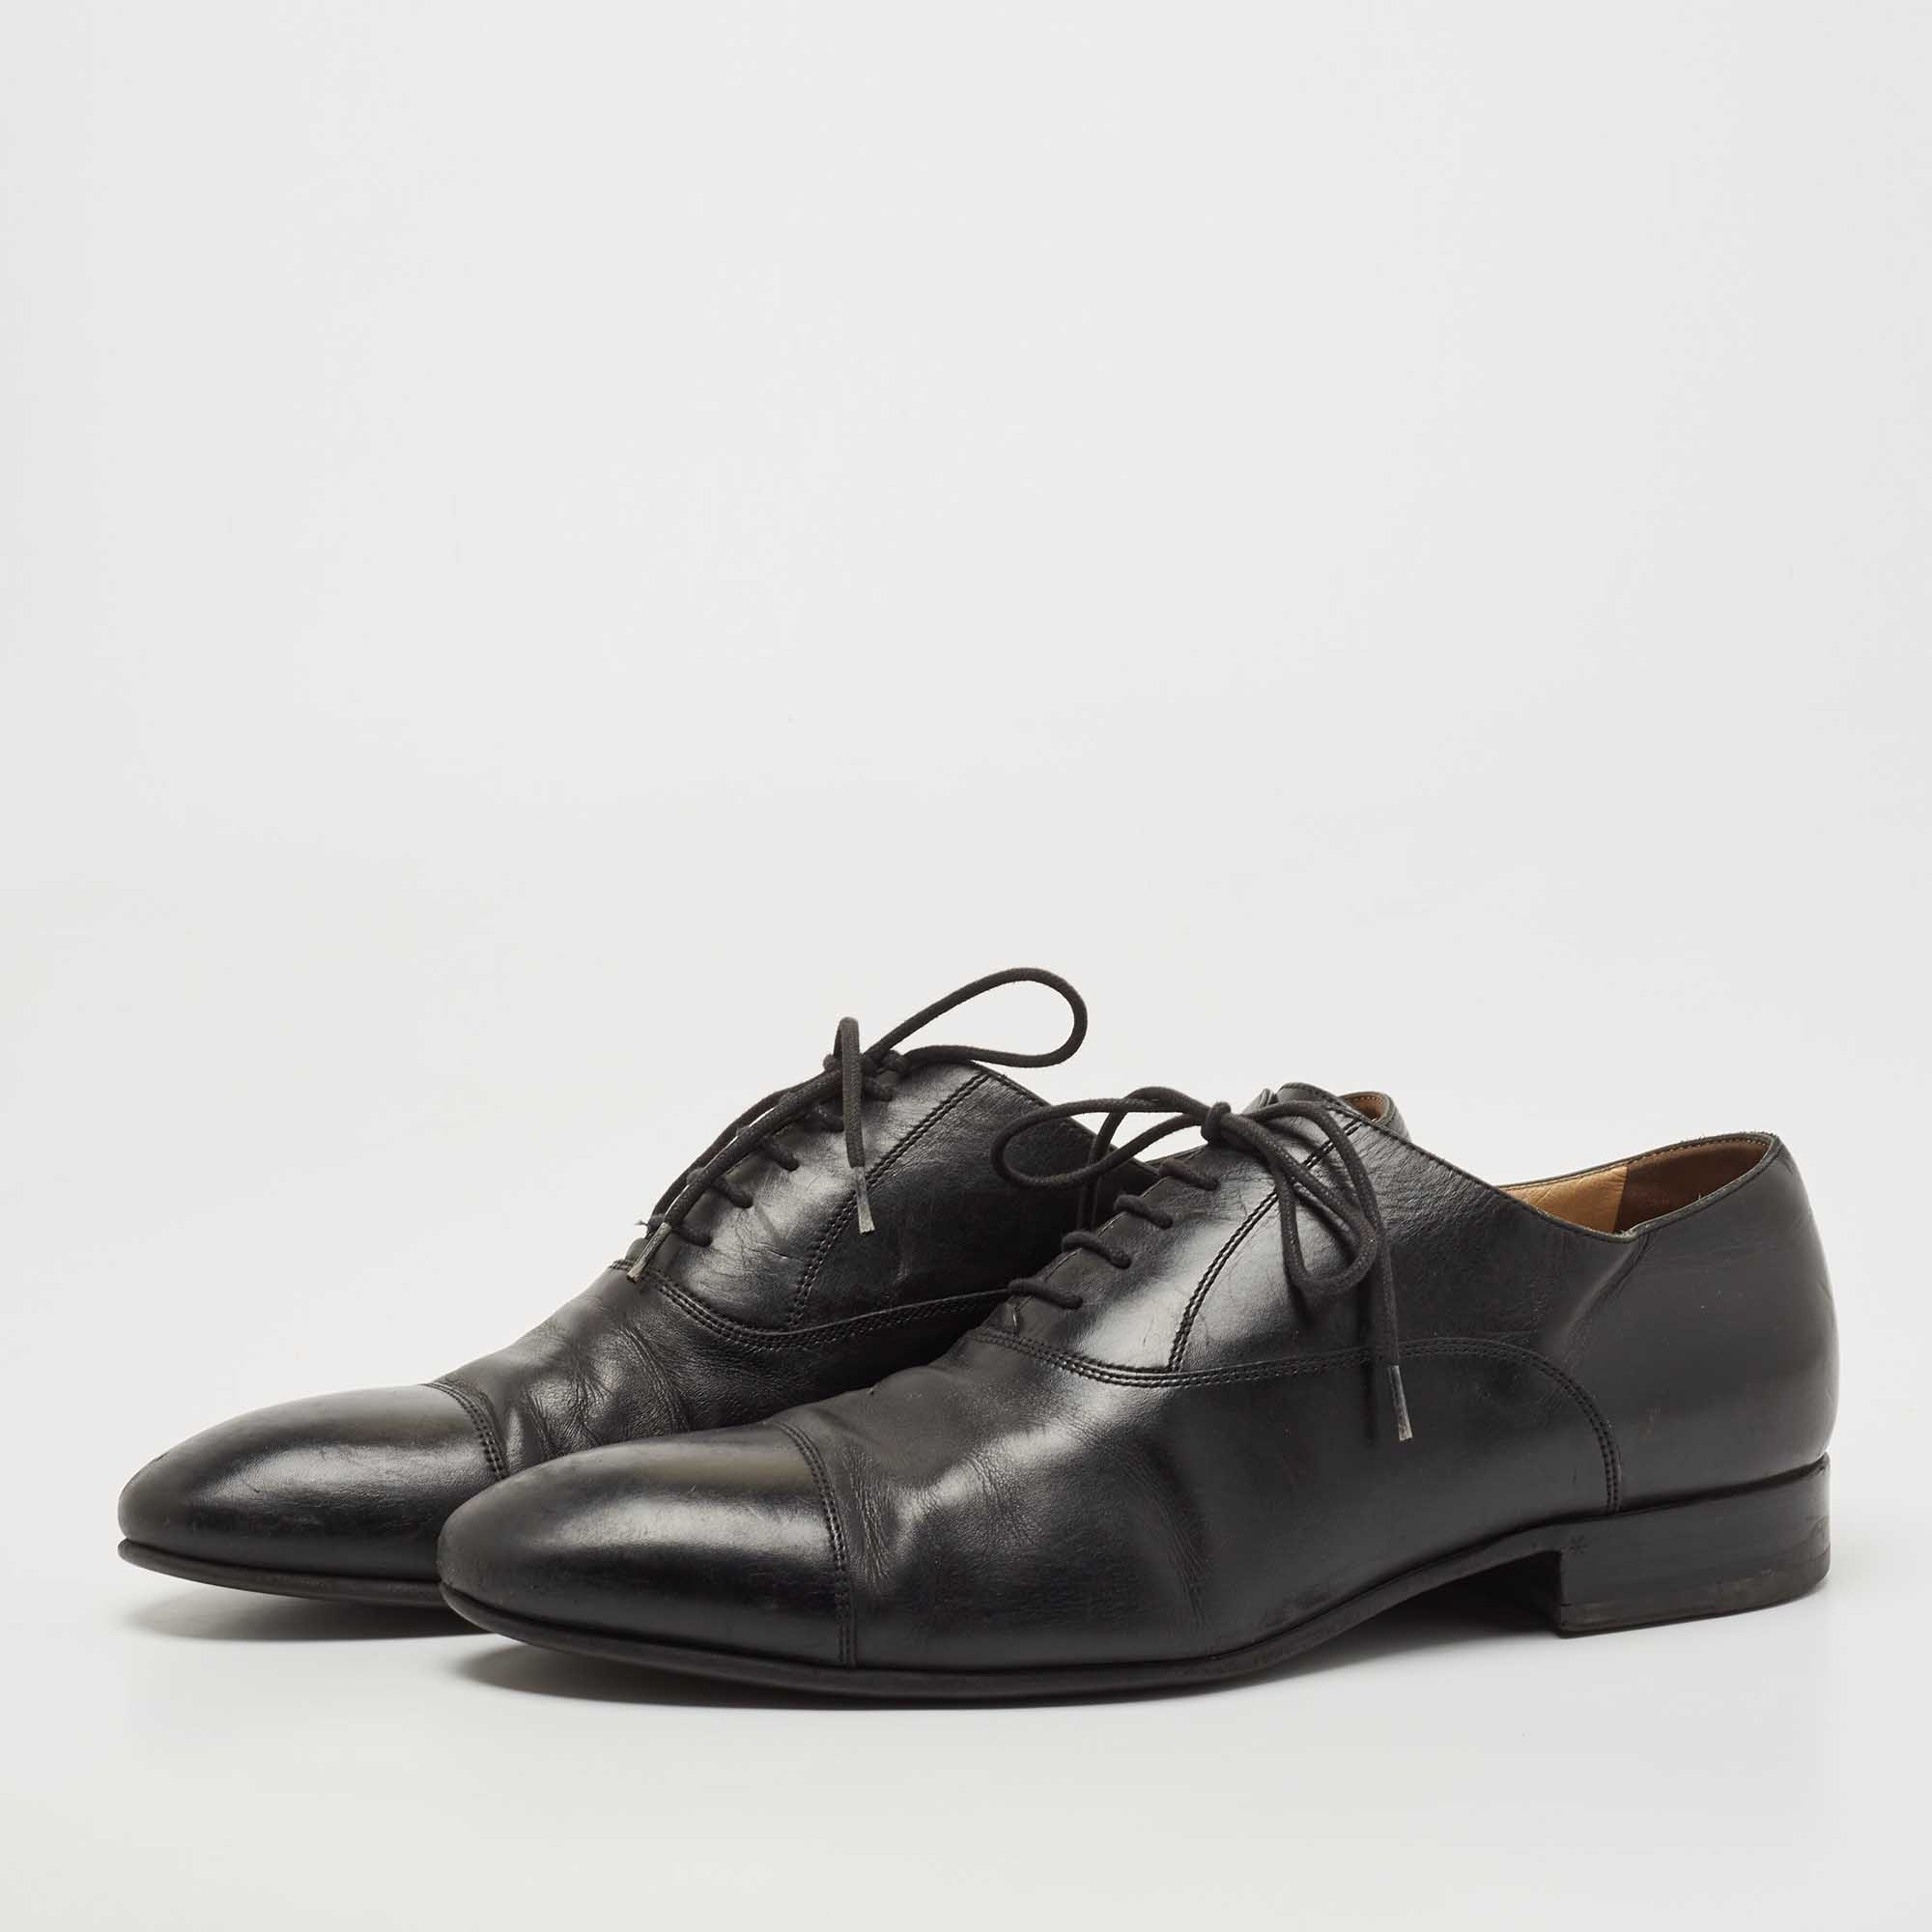 

Chanel Black Leather Lace Up Oxfords Size